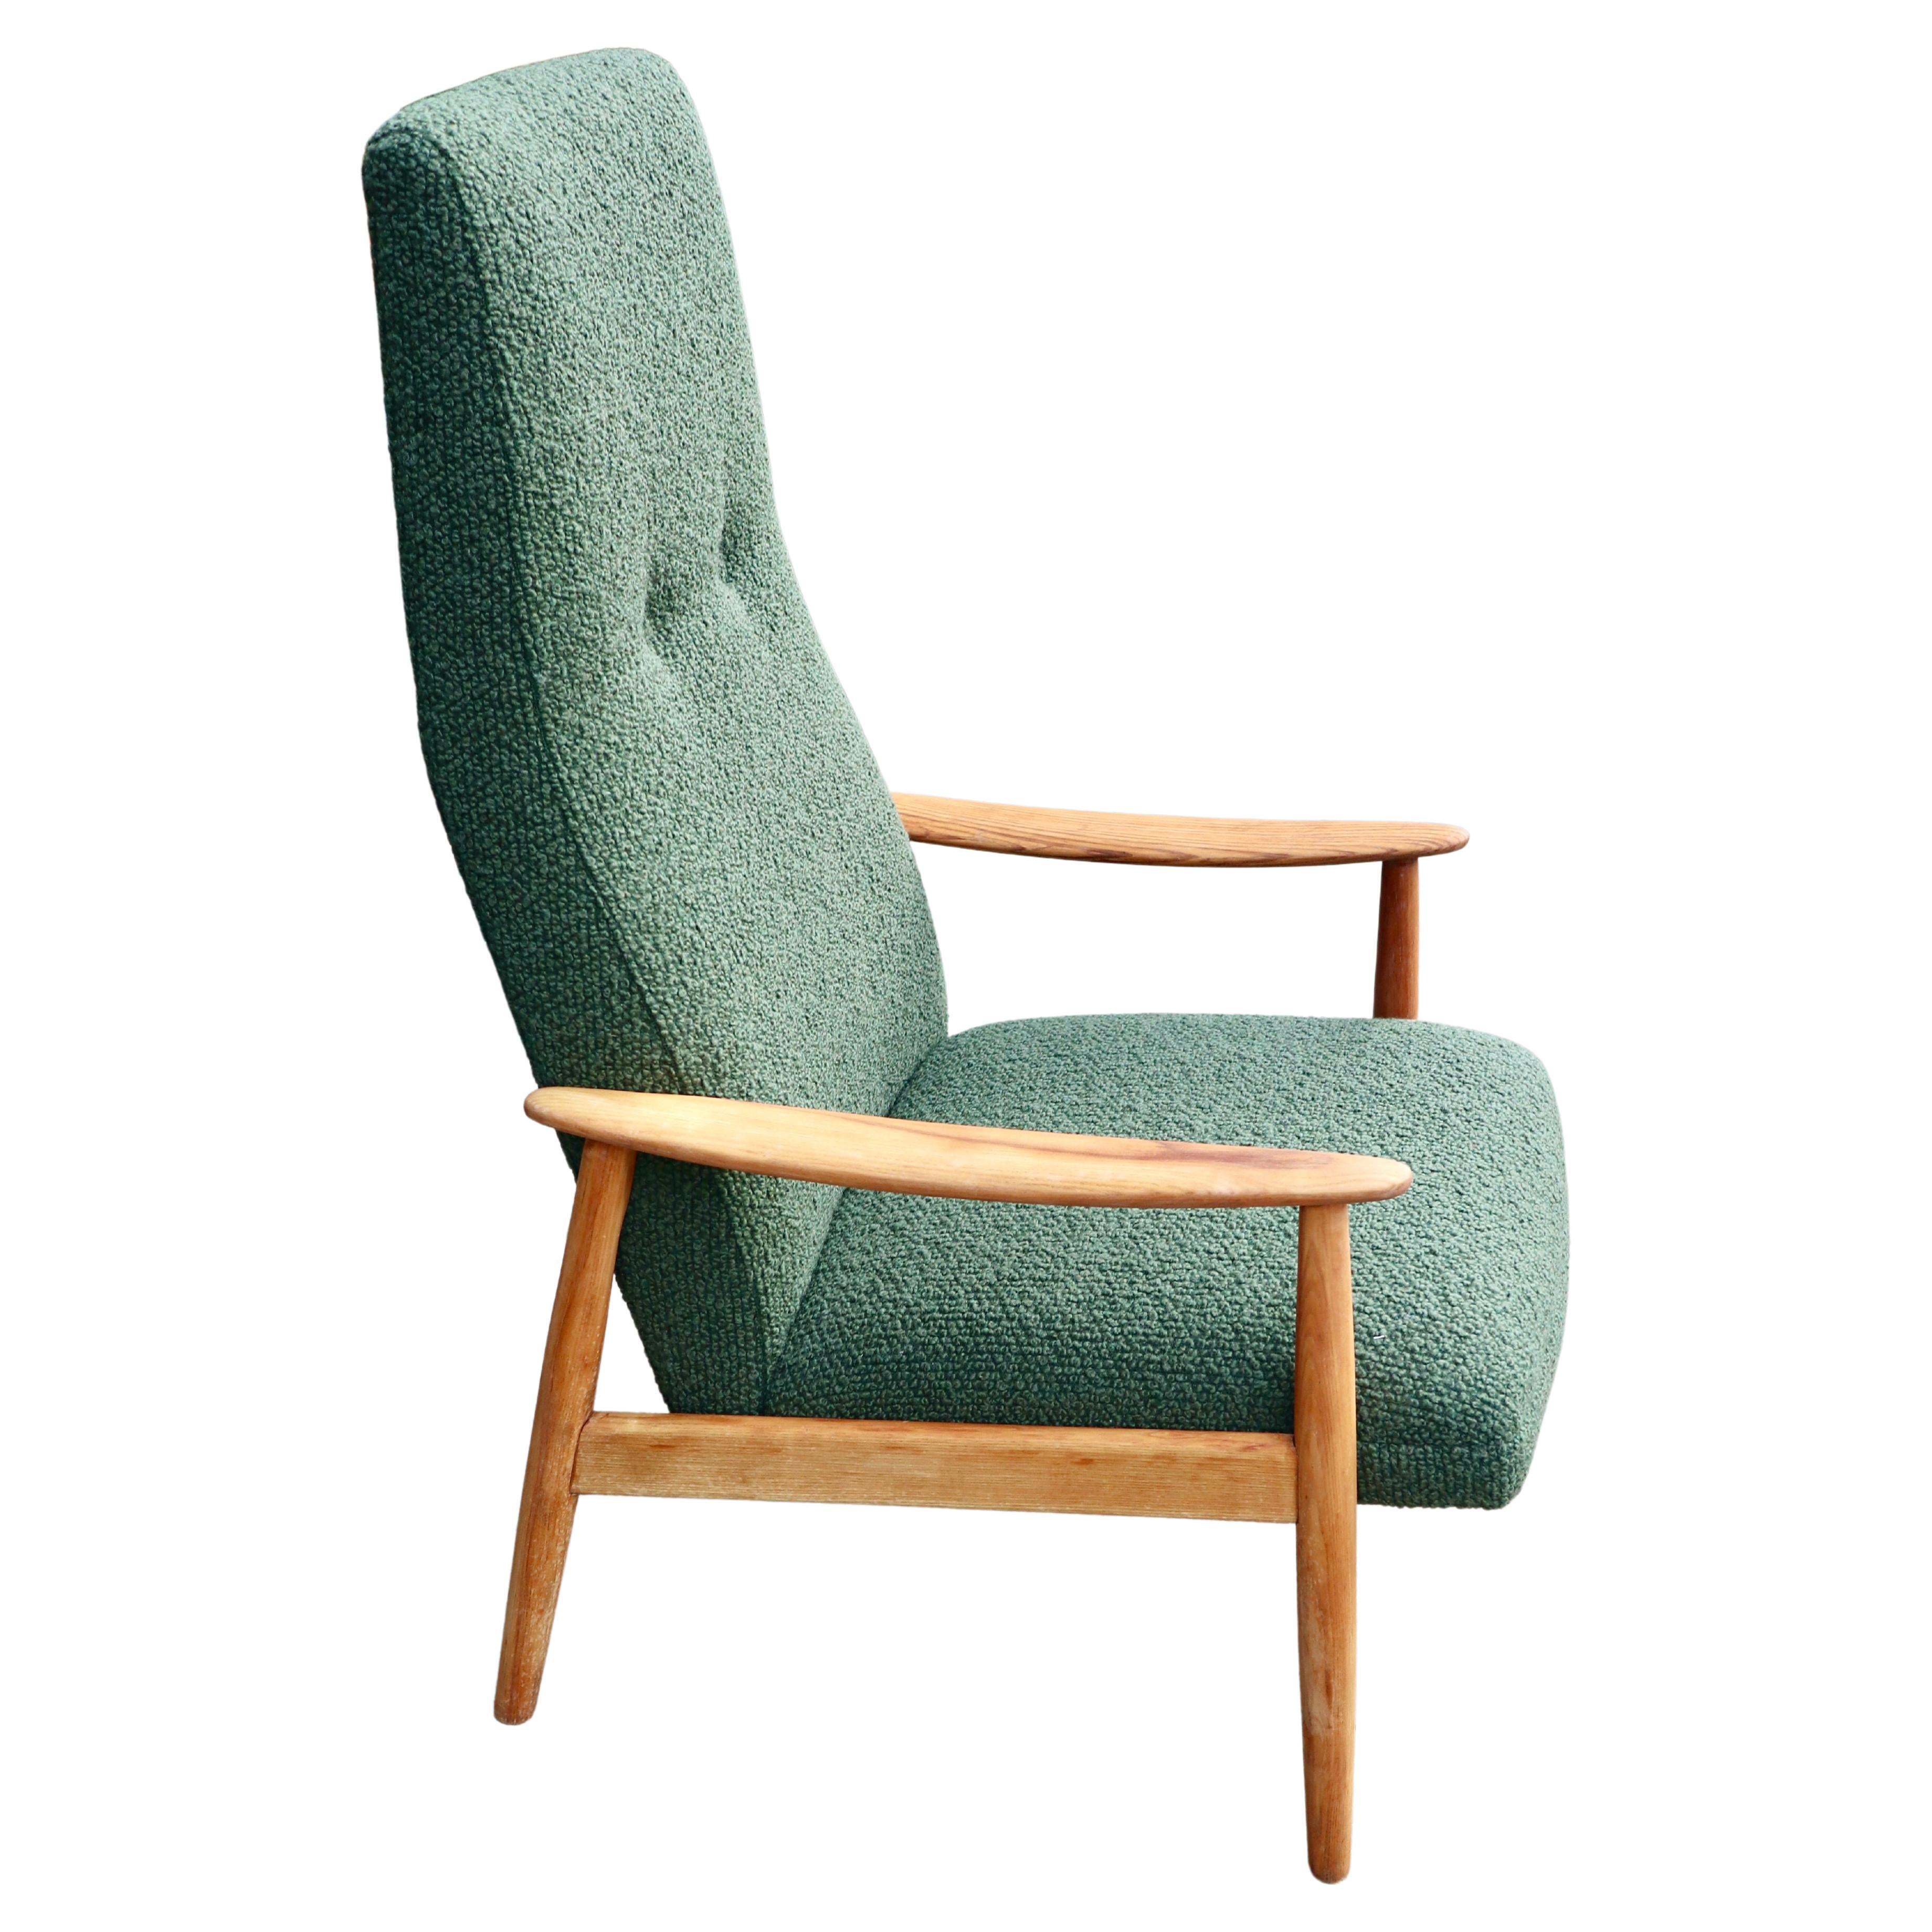 Vintage 1960s wood framed Danish lounge chair upholstered in moss green boucle.